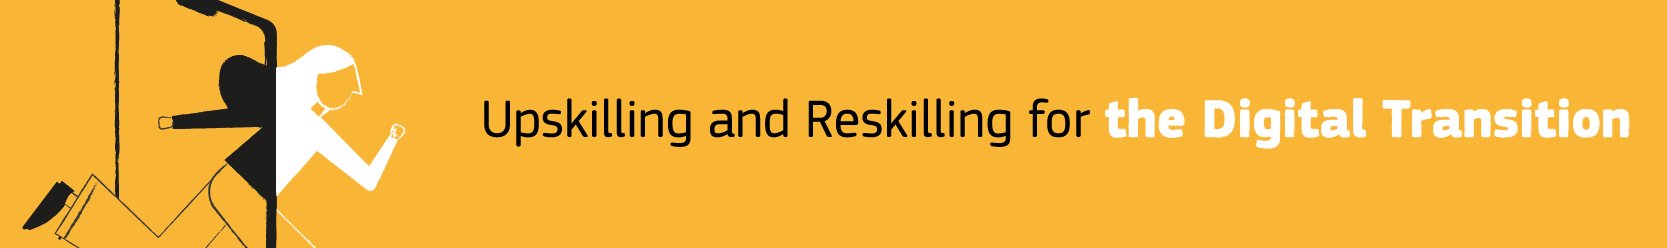  Upskilling and Reskilling for the Digital Transition